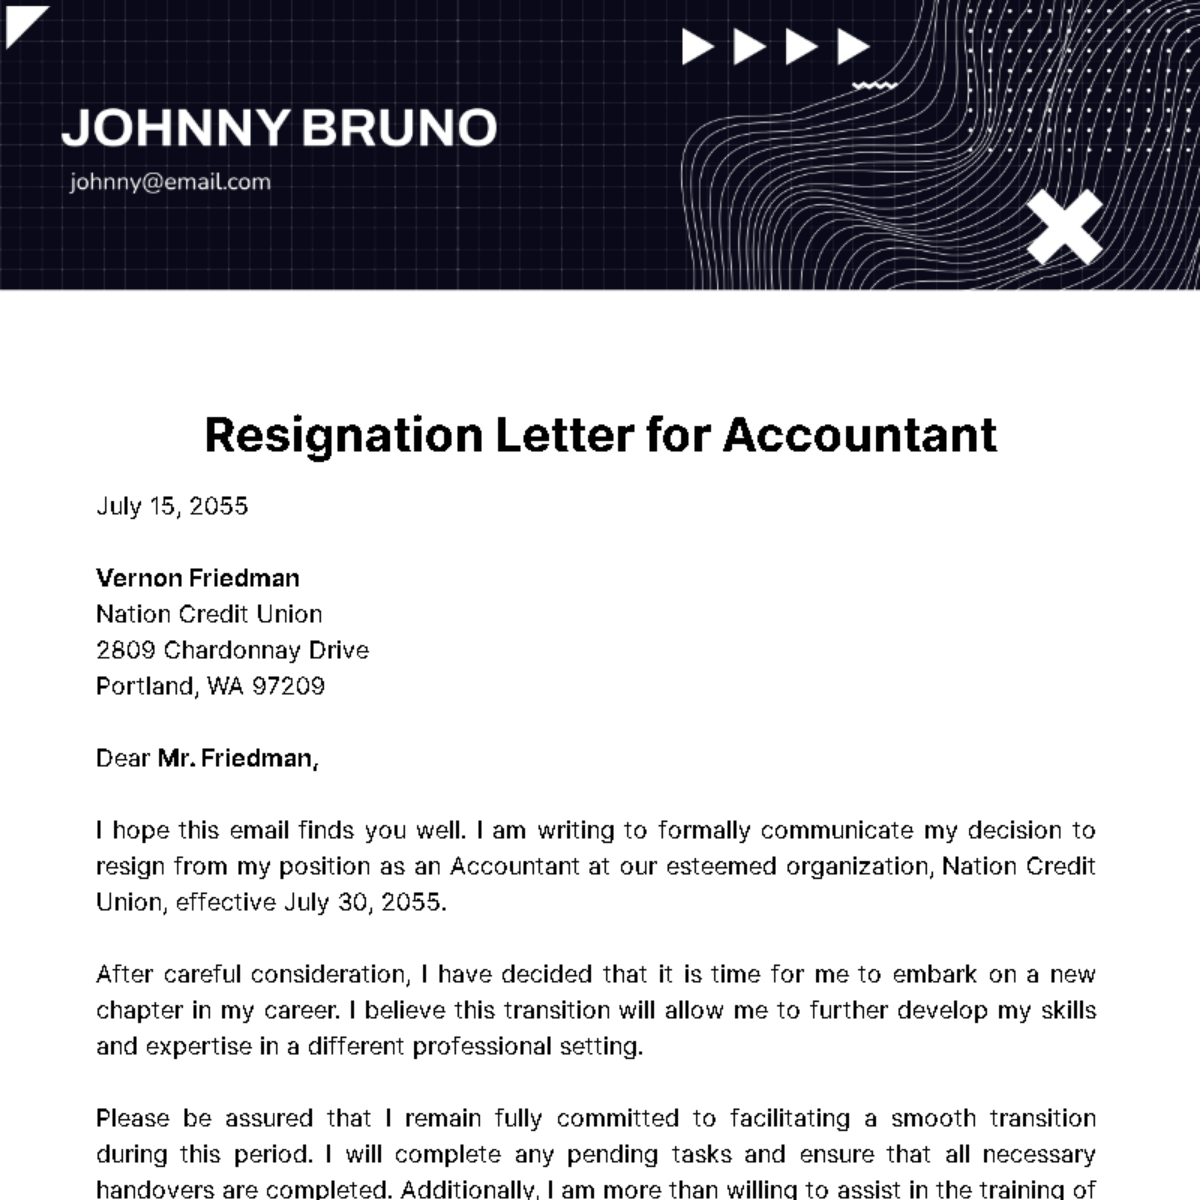 Resignation Letter for Accountant  Template